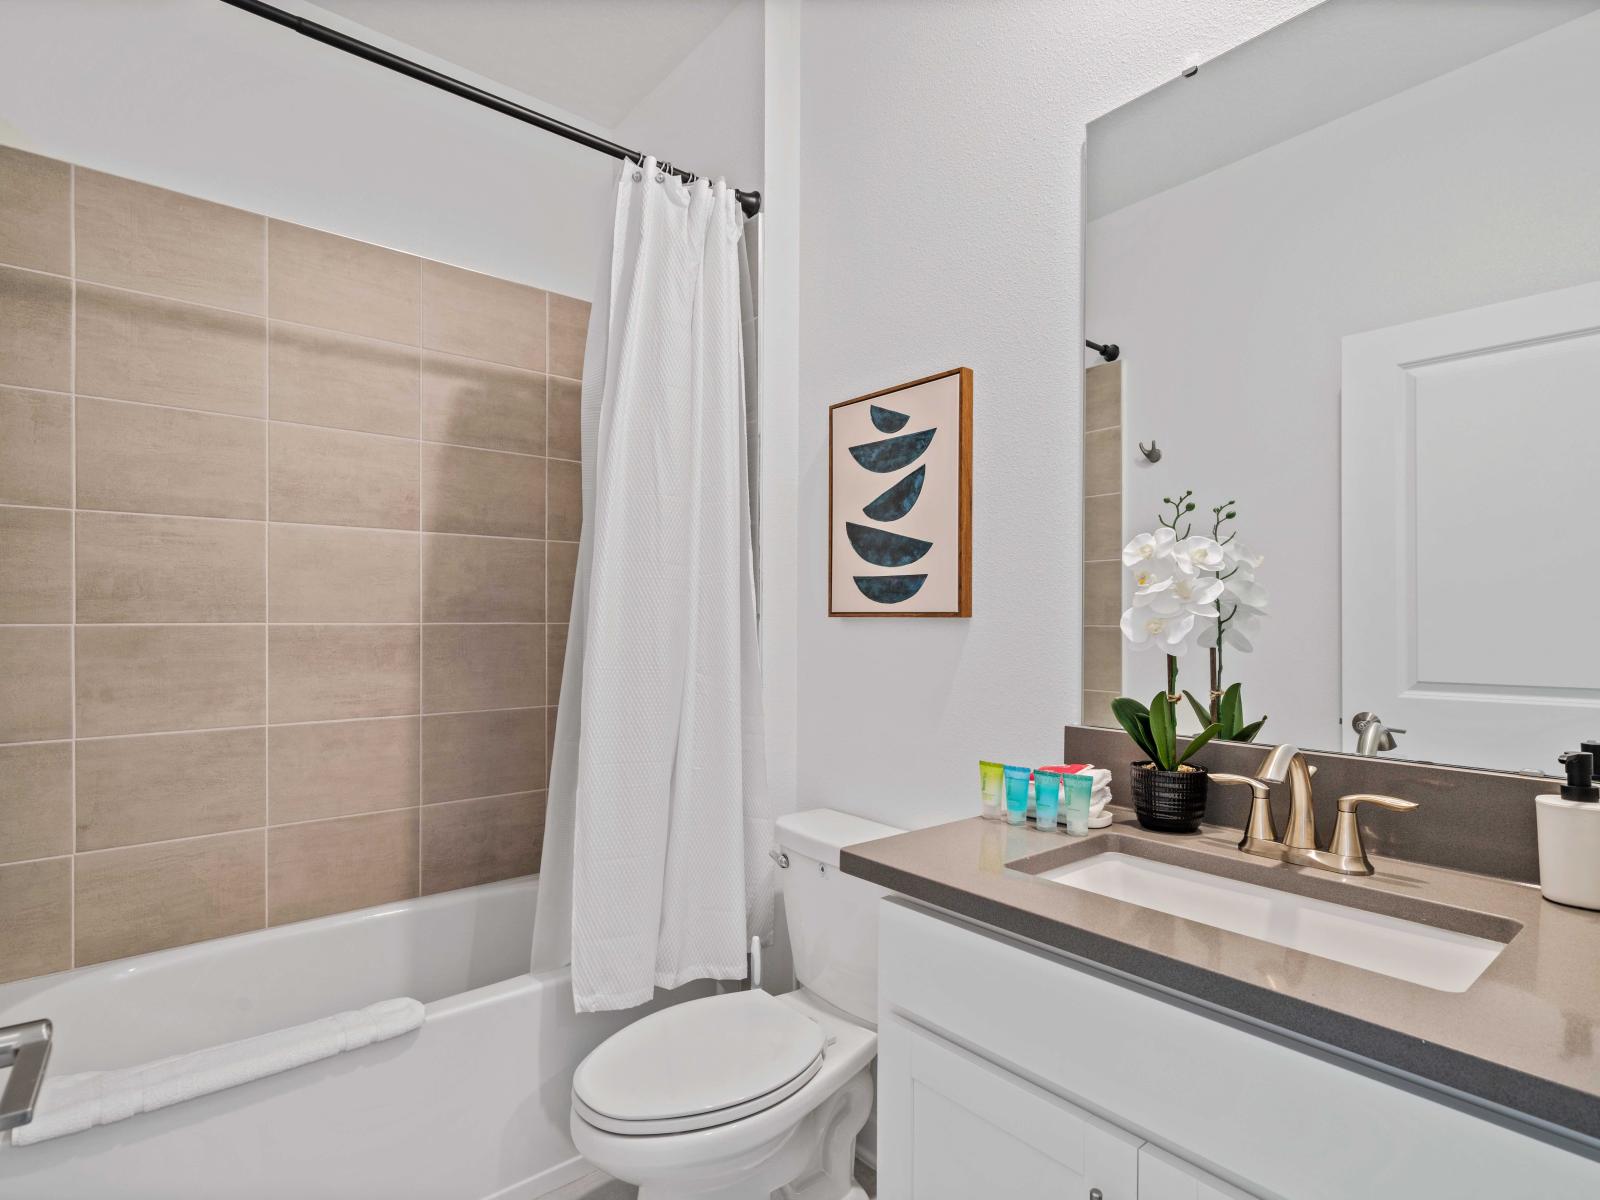 Elegant Bathroom of the Home in Davenport Florida - Bathtub and a shower combo - Luxe vanity with Large Mirror - Elegant bathroom with luxurious fixtures and finishes